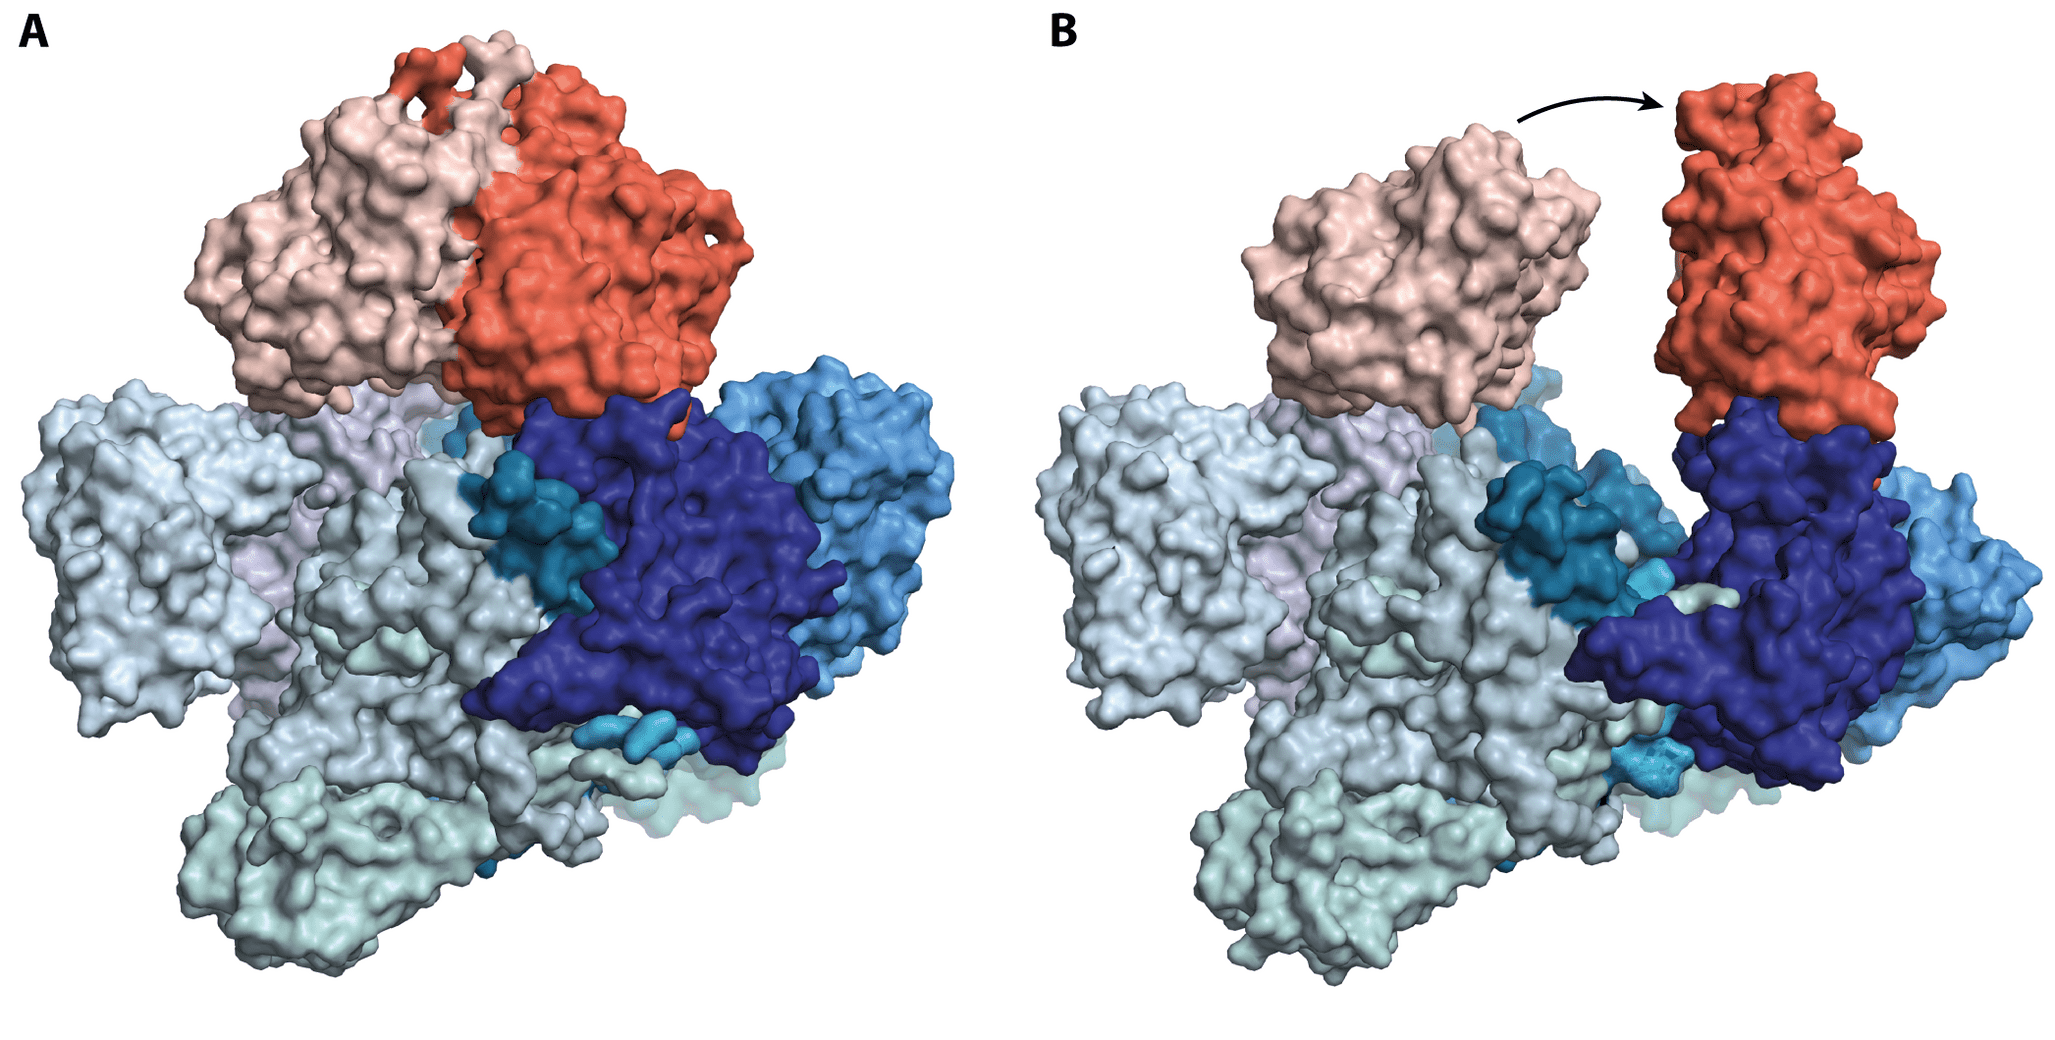 The C-P lyase enzyme in two different states